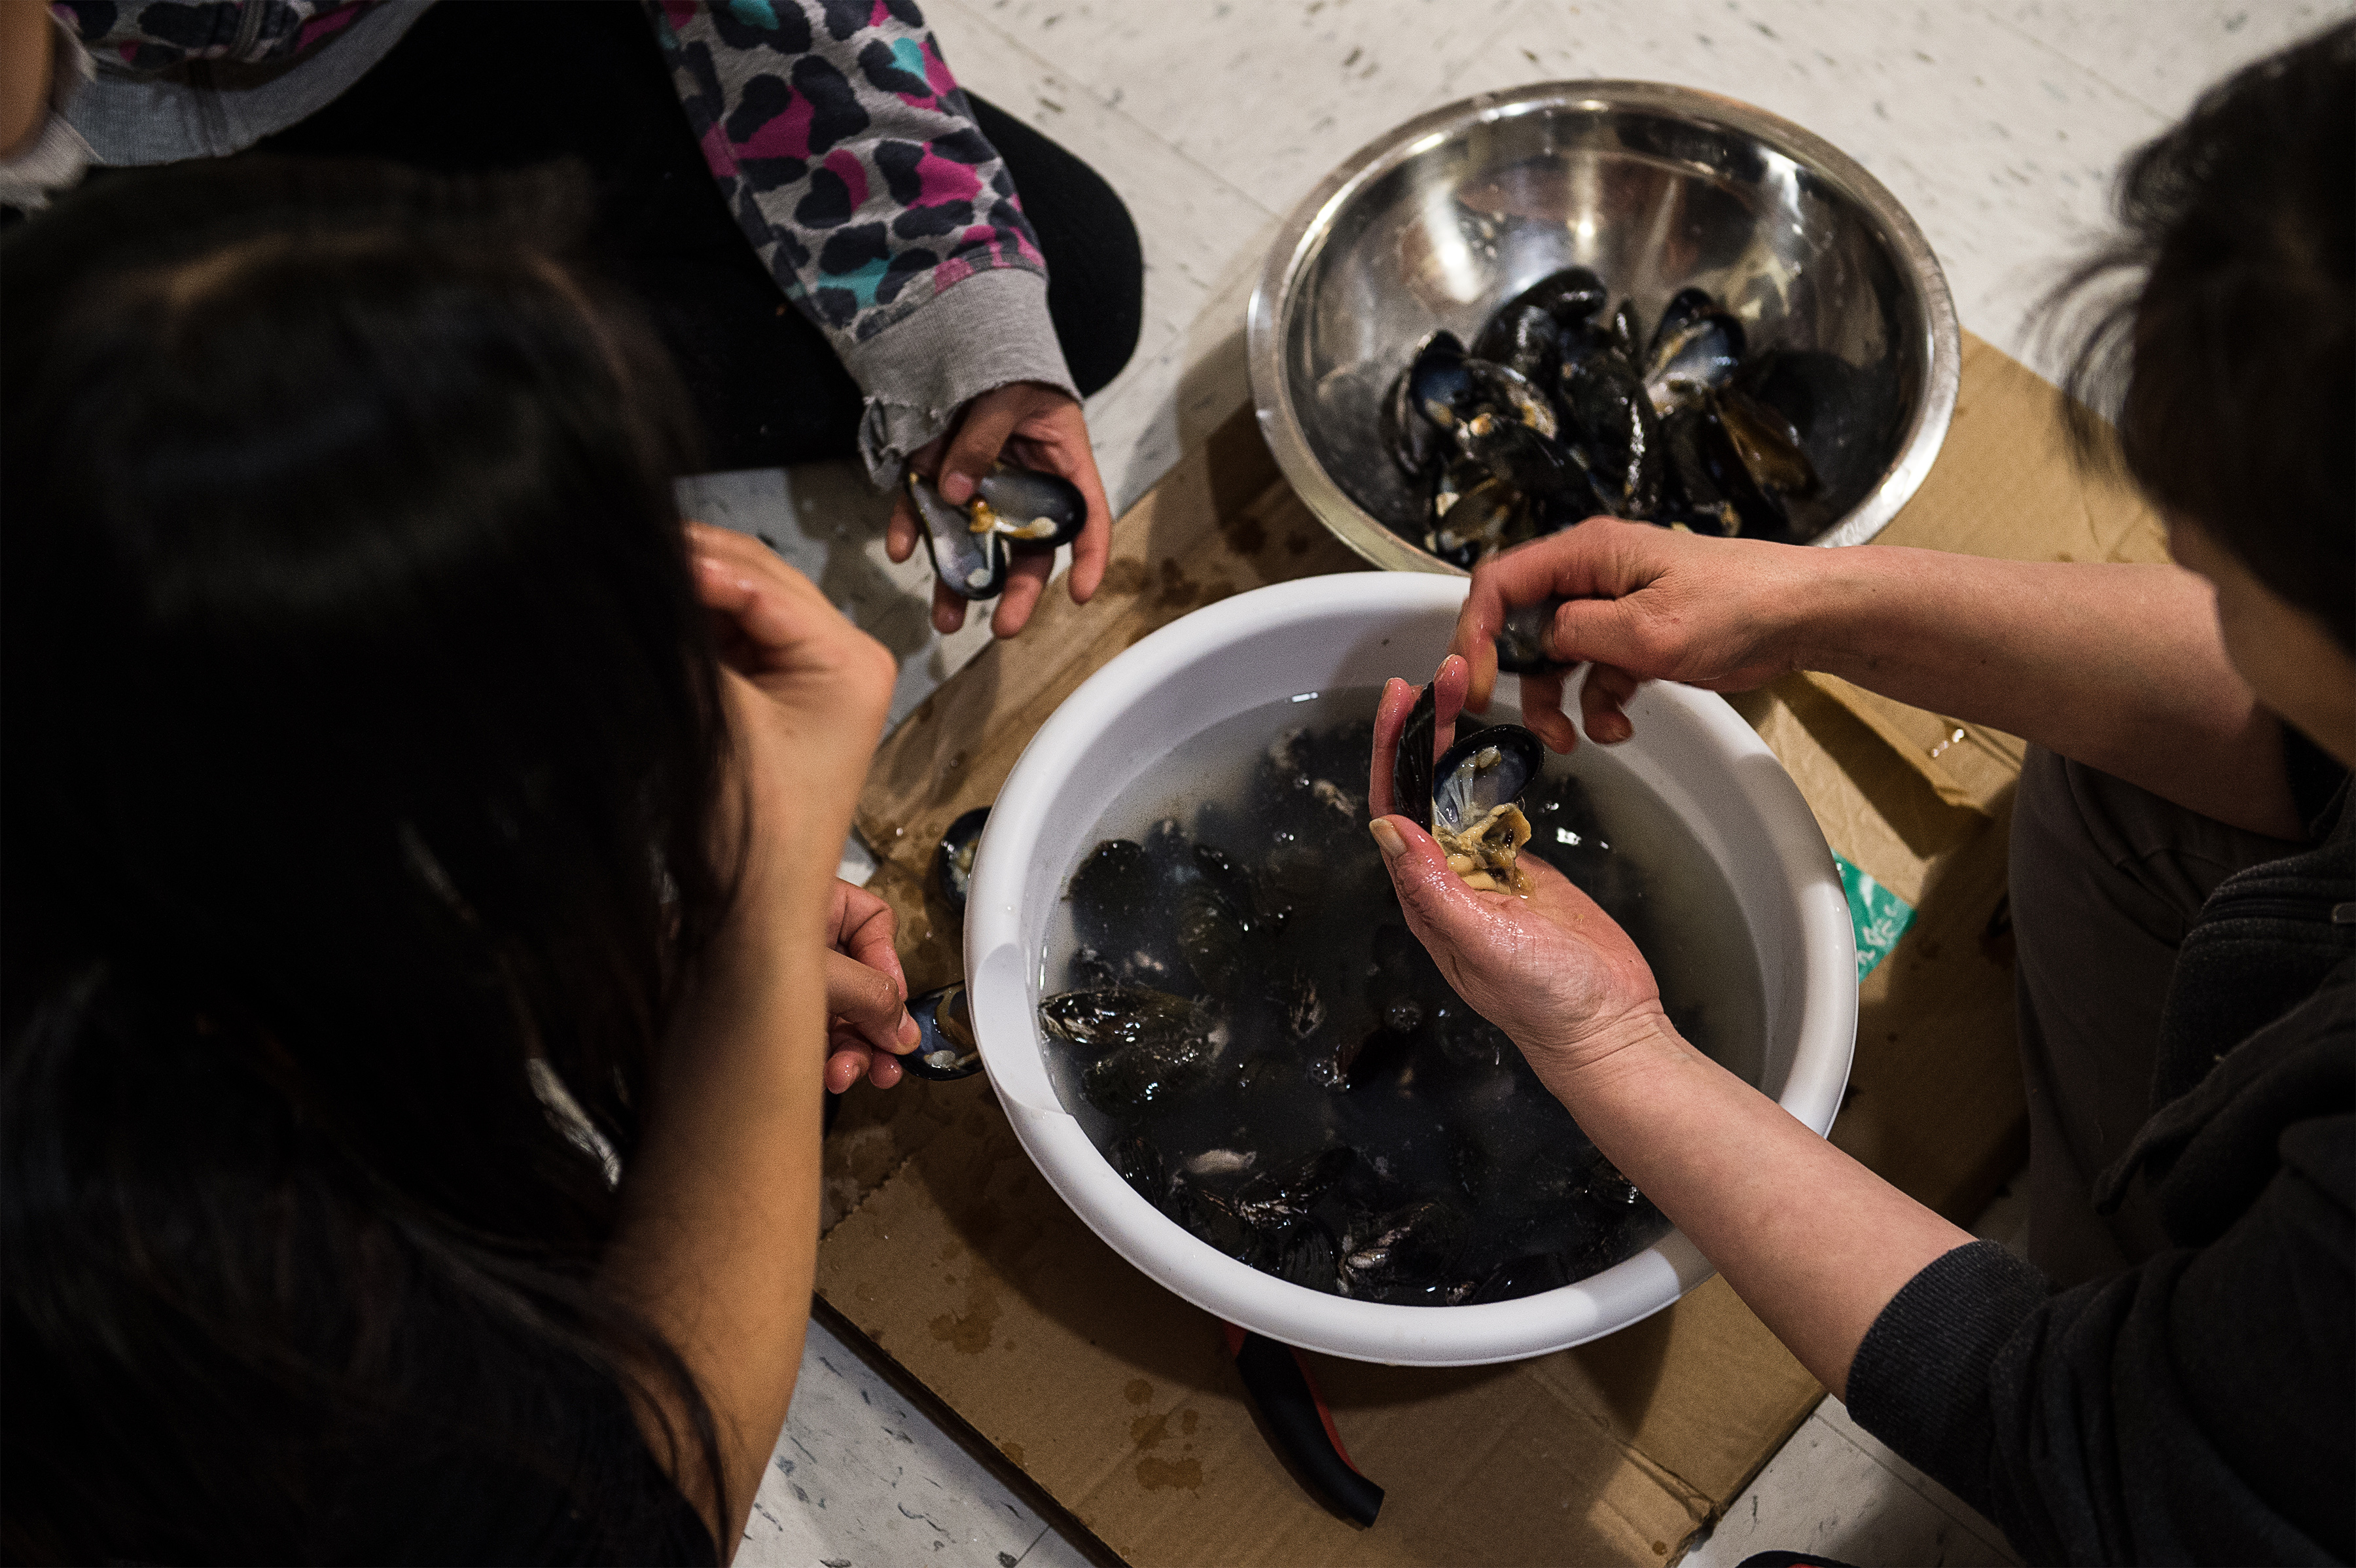 Siasi Qisiiq, right, Nayumik Qisiiq, center, and Annie Koniak eat raw mussels in Kangiqsujuaq, Nunavik, Quebec, March 2, 2017. When the winter tide goes out on a northern Canadian bay, some Inuit clamber into the ice caves below to harvest fresh food. (Aaron Vincent Elkaim/The New York Times)